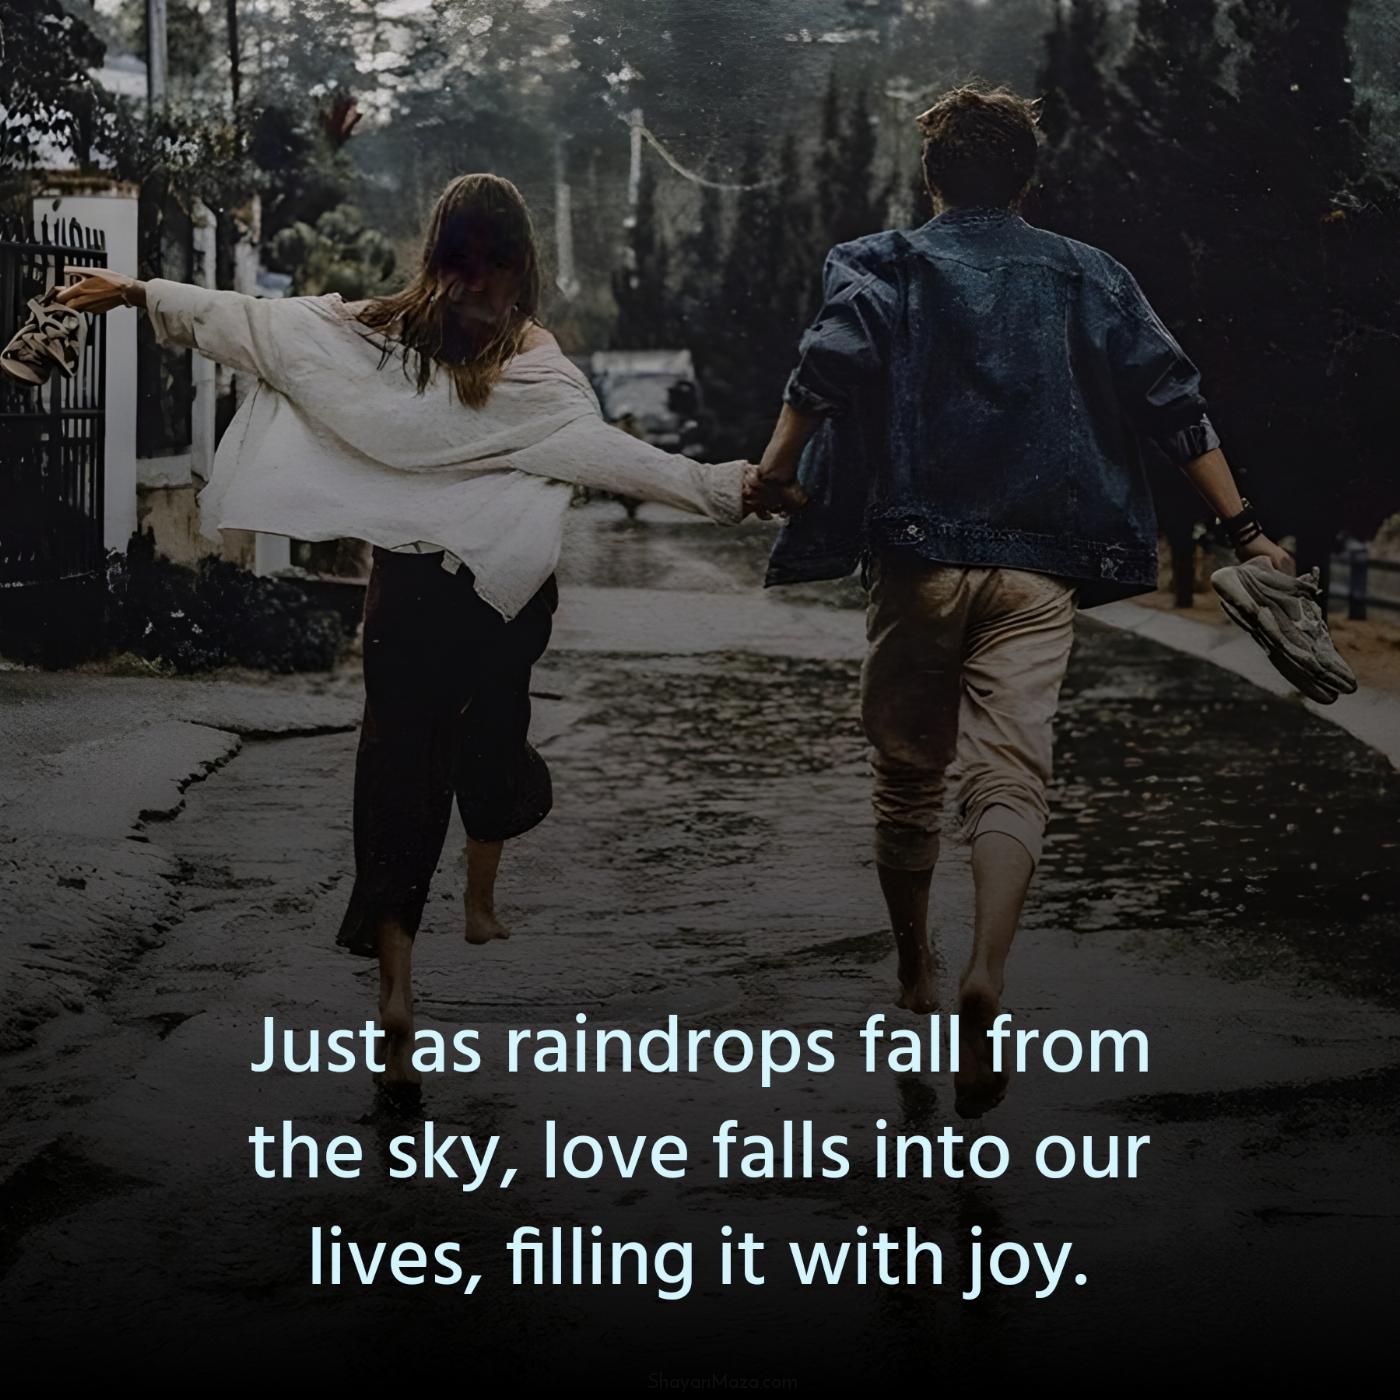 Just as raindrops fall from the sky love falls into our lives